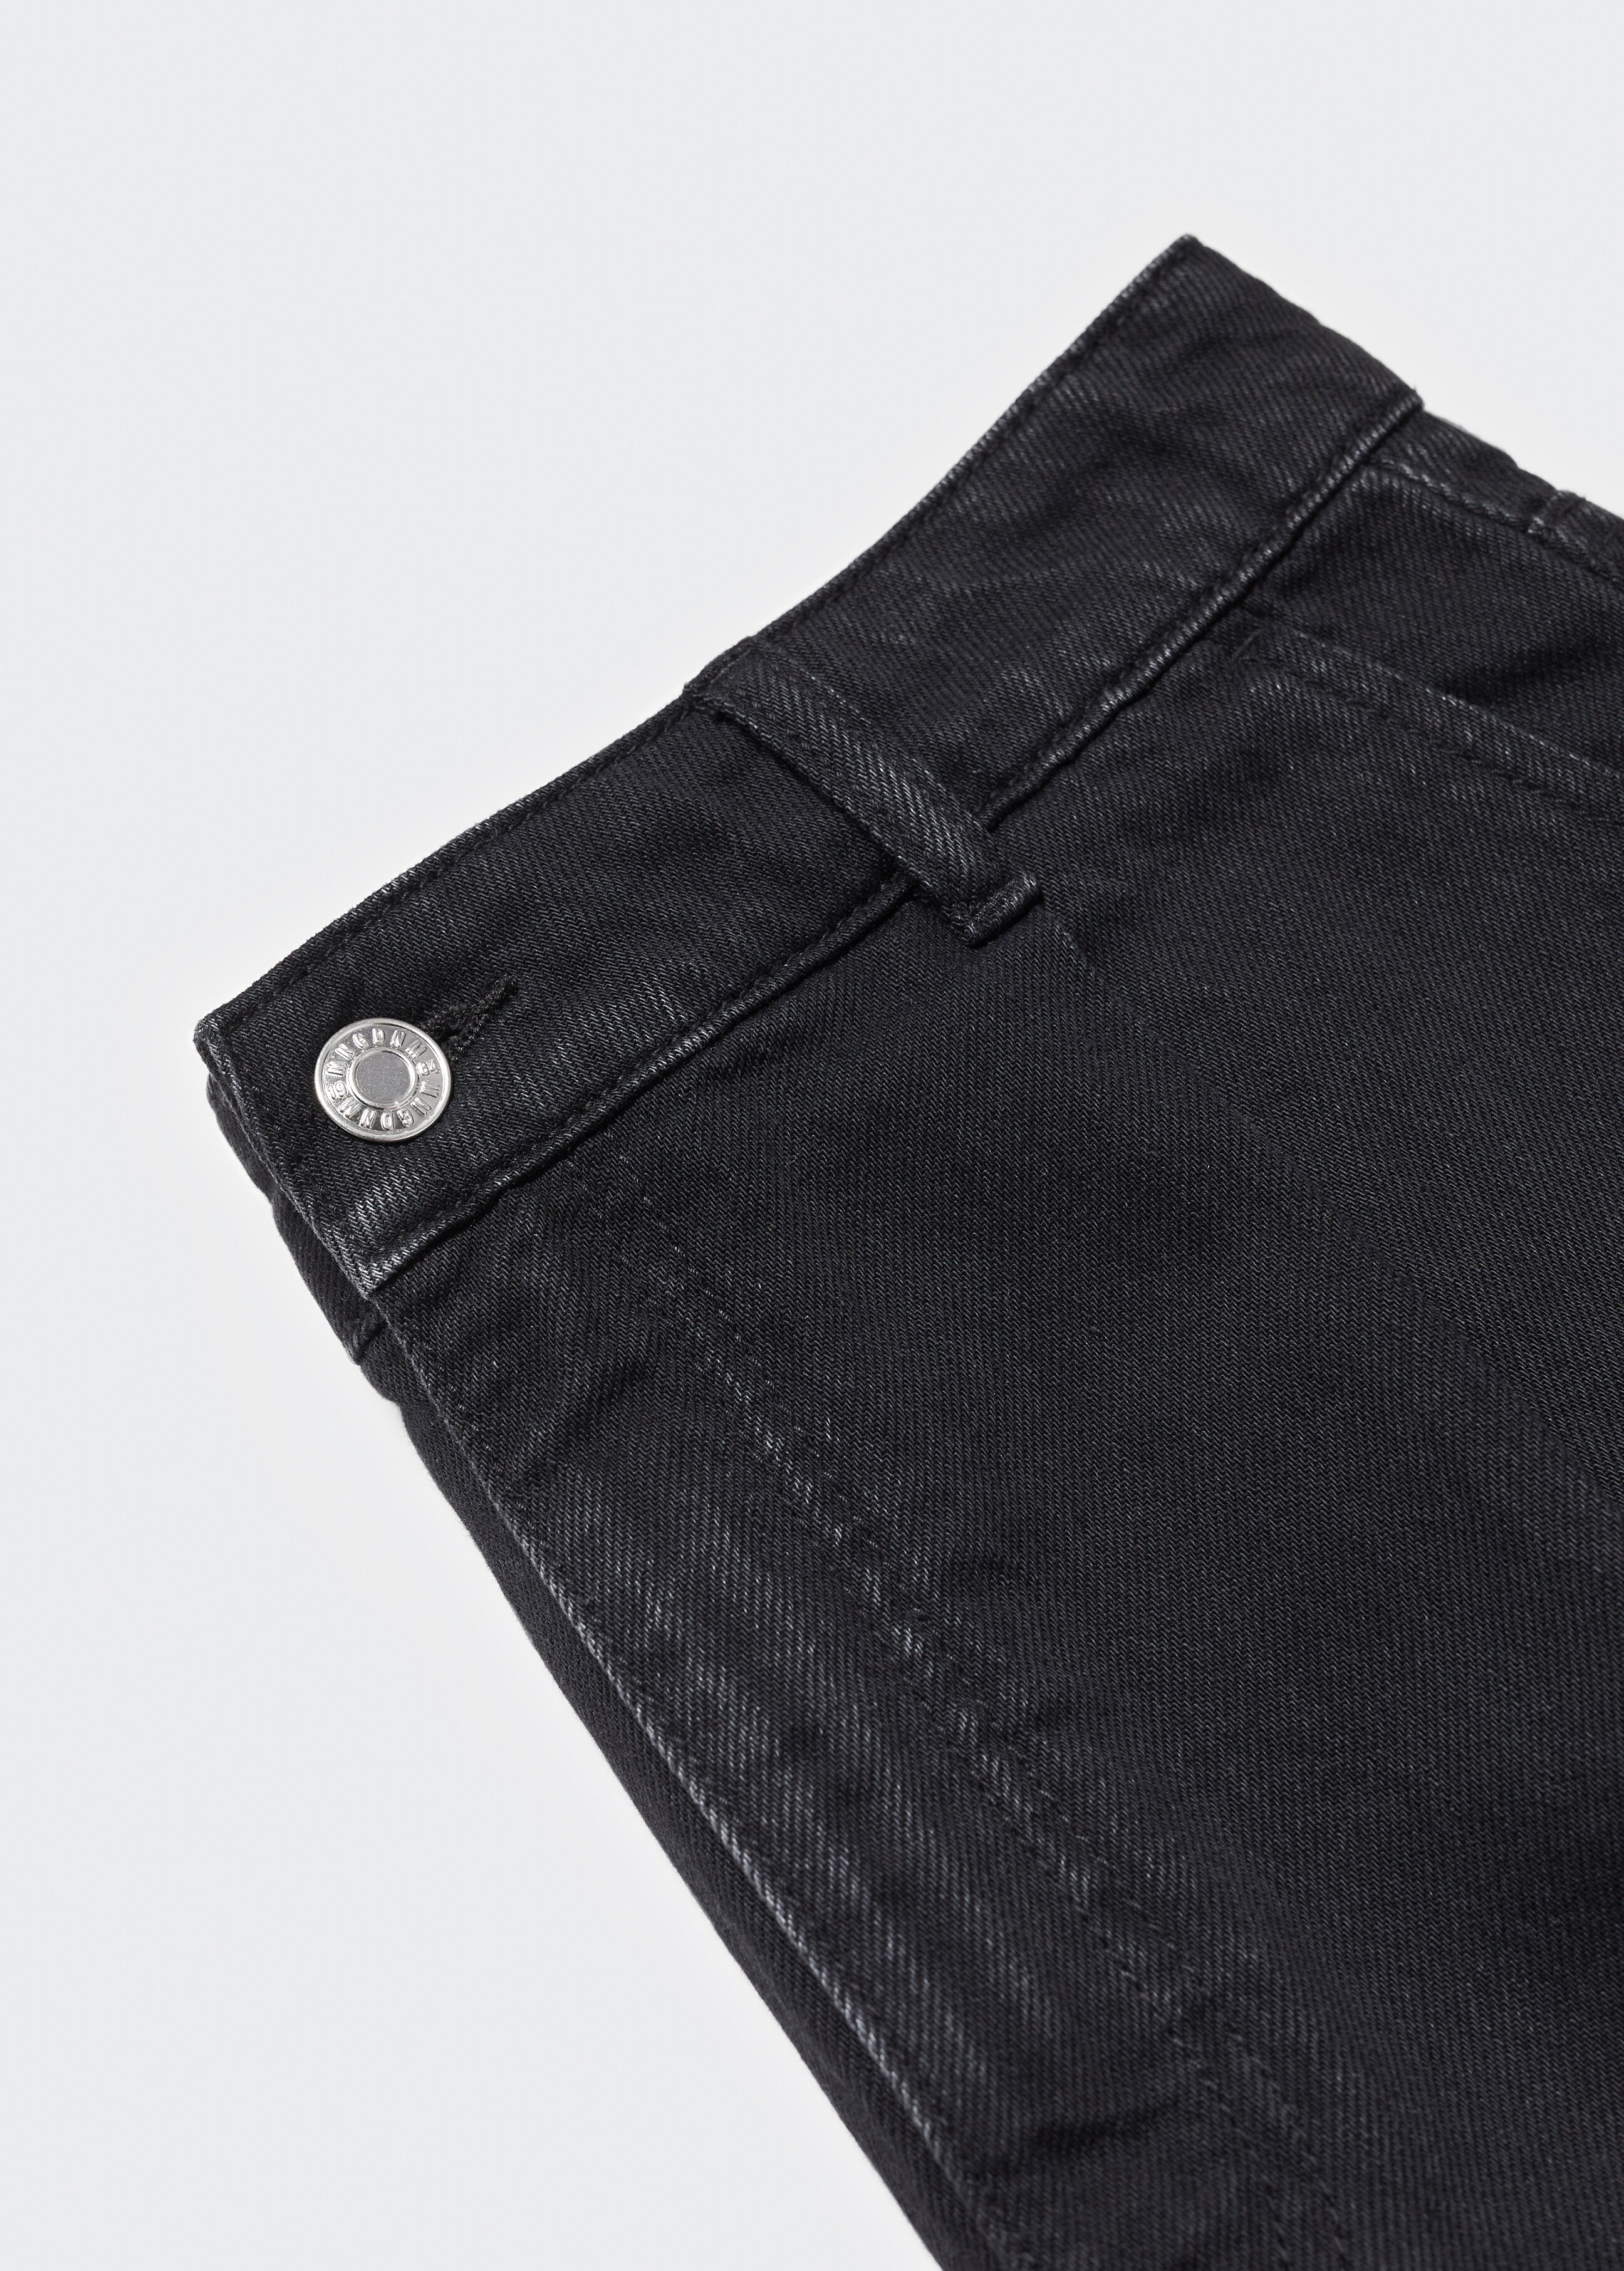 Slouchy denim shorts - Details of the article 8